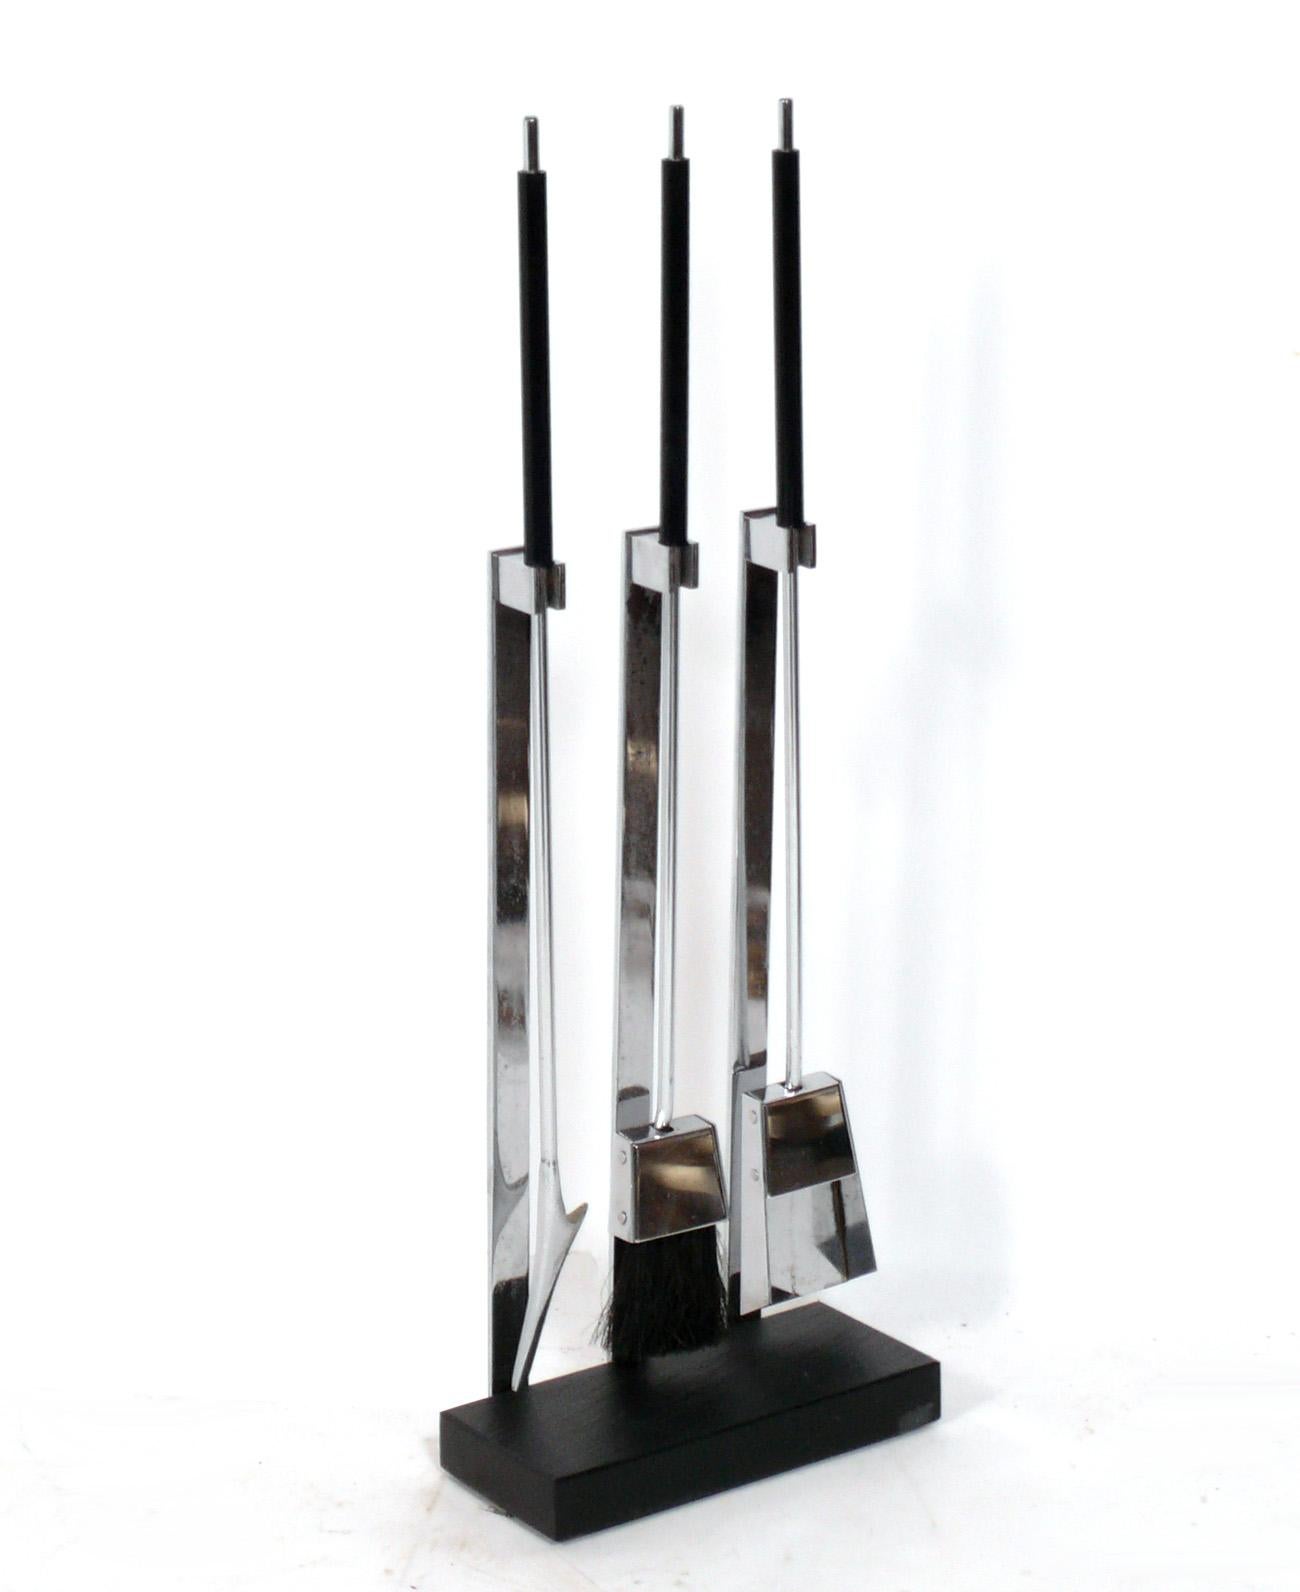 Set of Sculptural Chrome Fireplace Tools, designed by Alessandro Albrizzi, American, circa 1970s. They are constructed of chromed metal with a slate base. Fire tools.